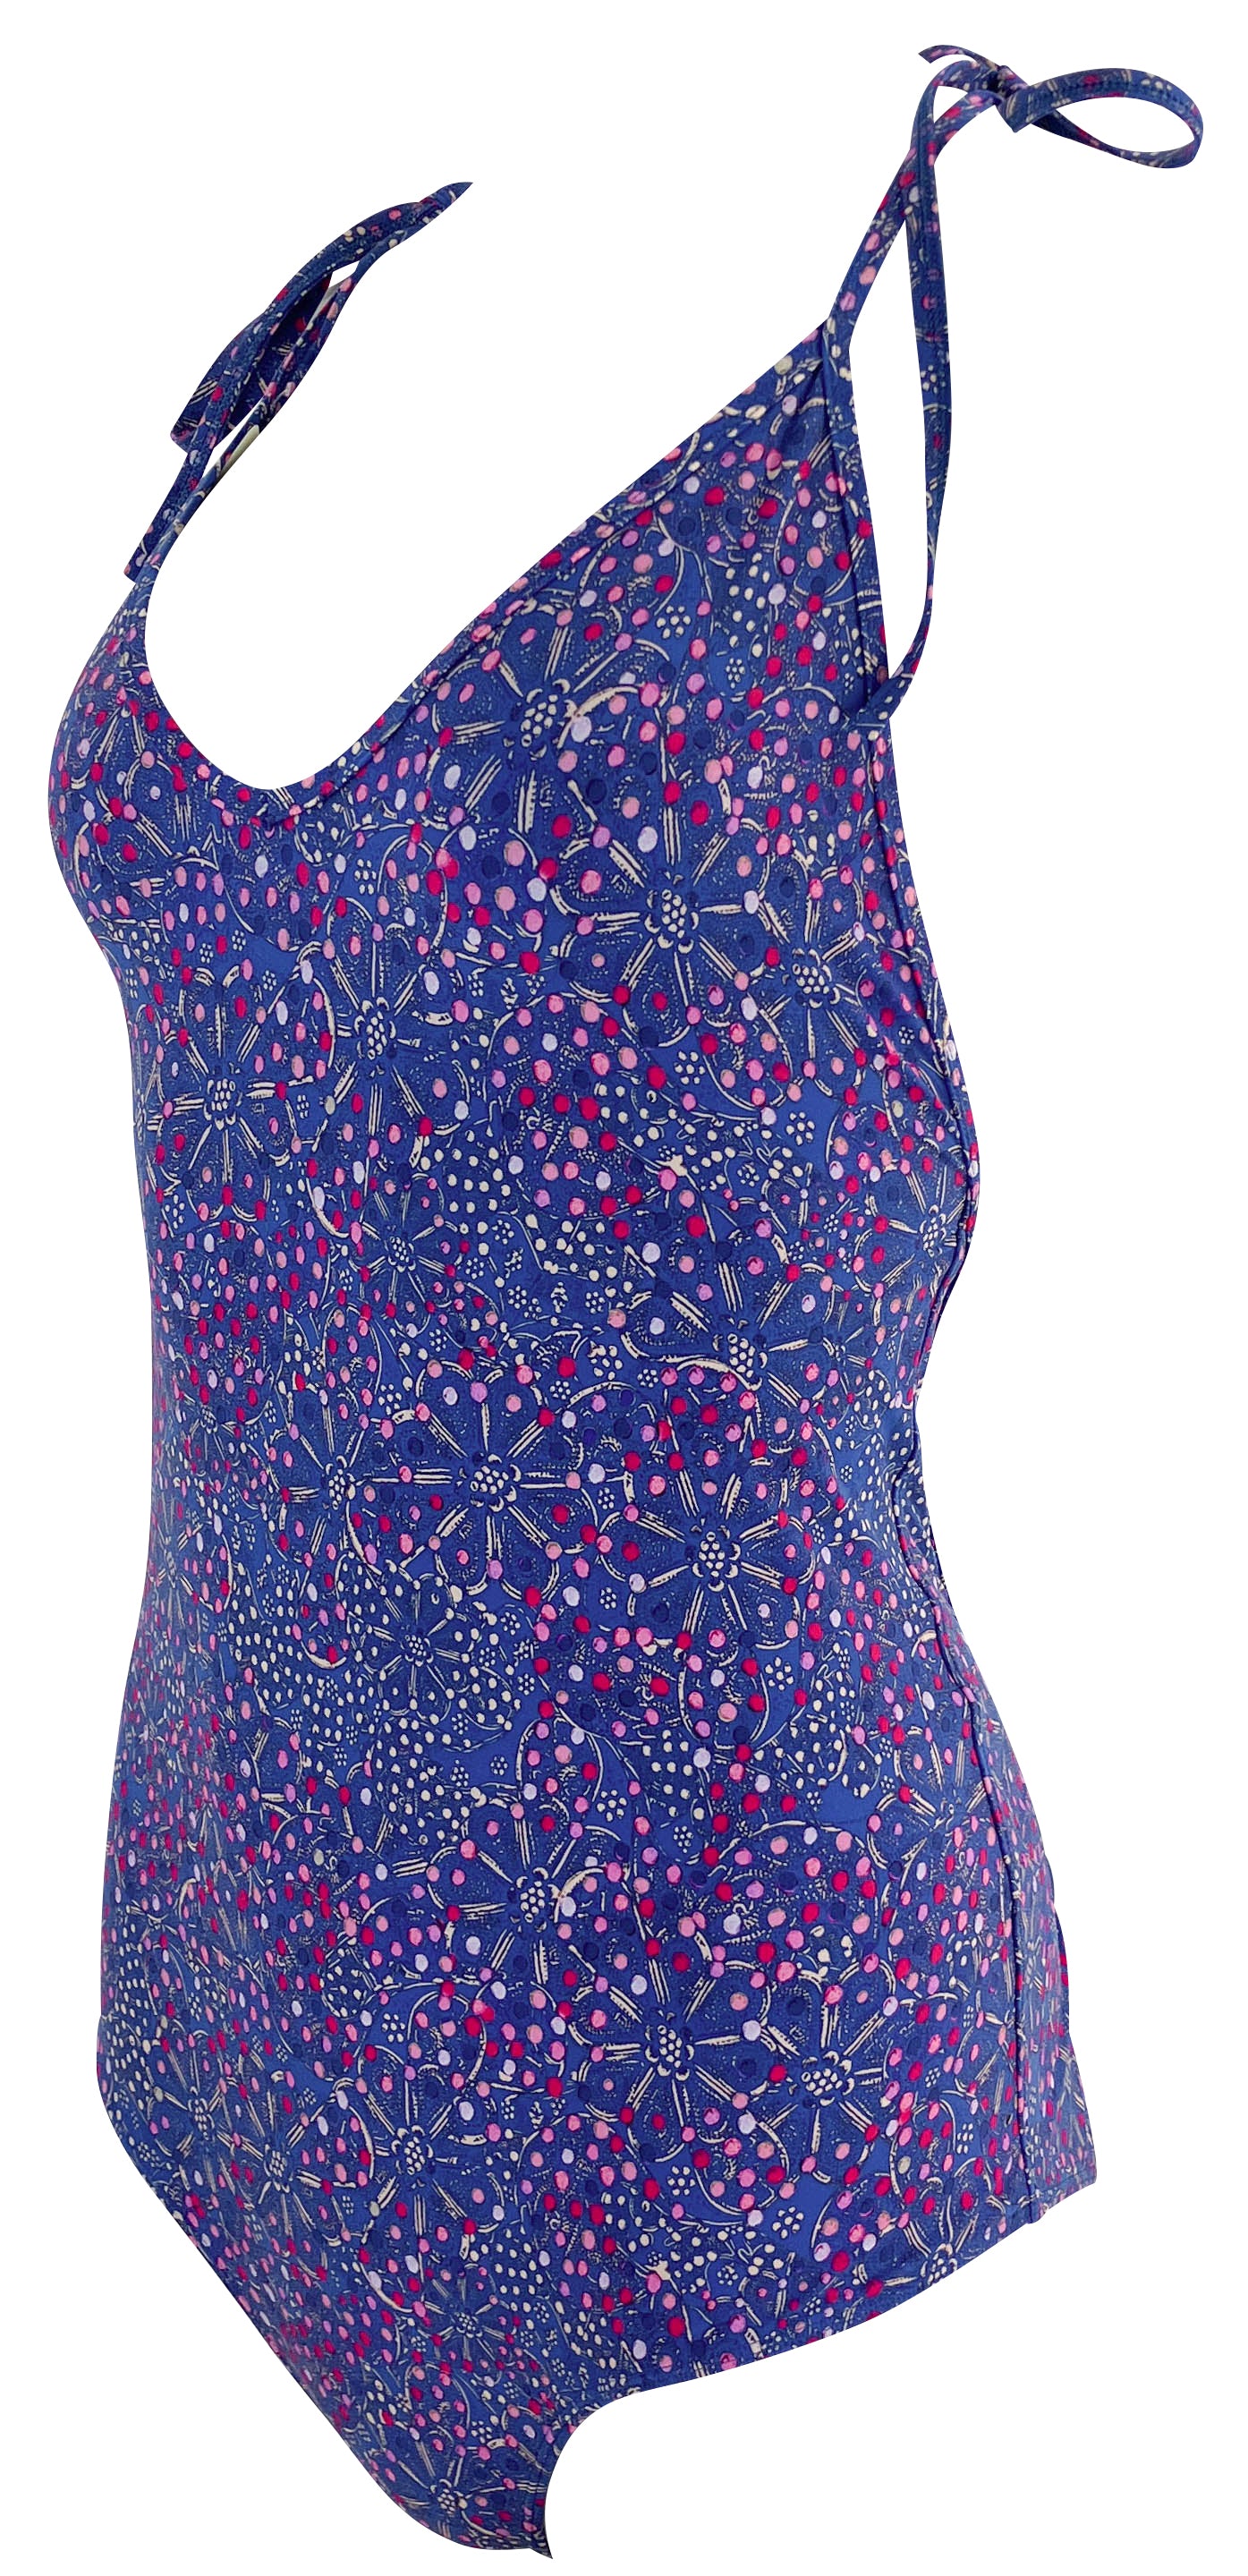 Isabel Marant Swan Swimsuit in Blue and Pink - Discounts on Isabel Marant at UAL